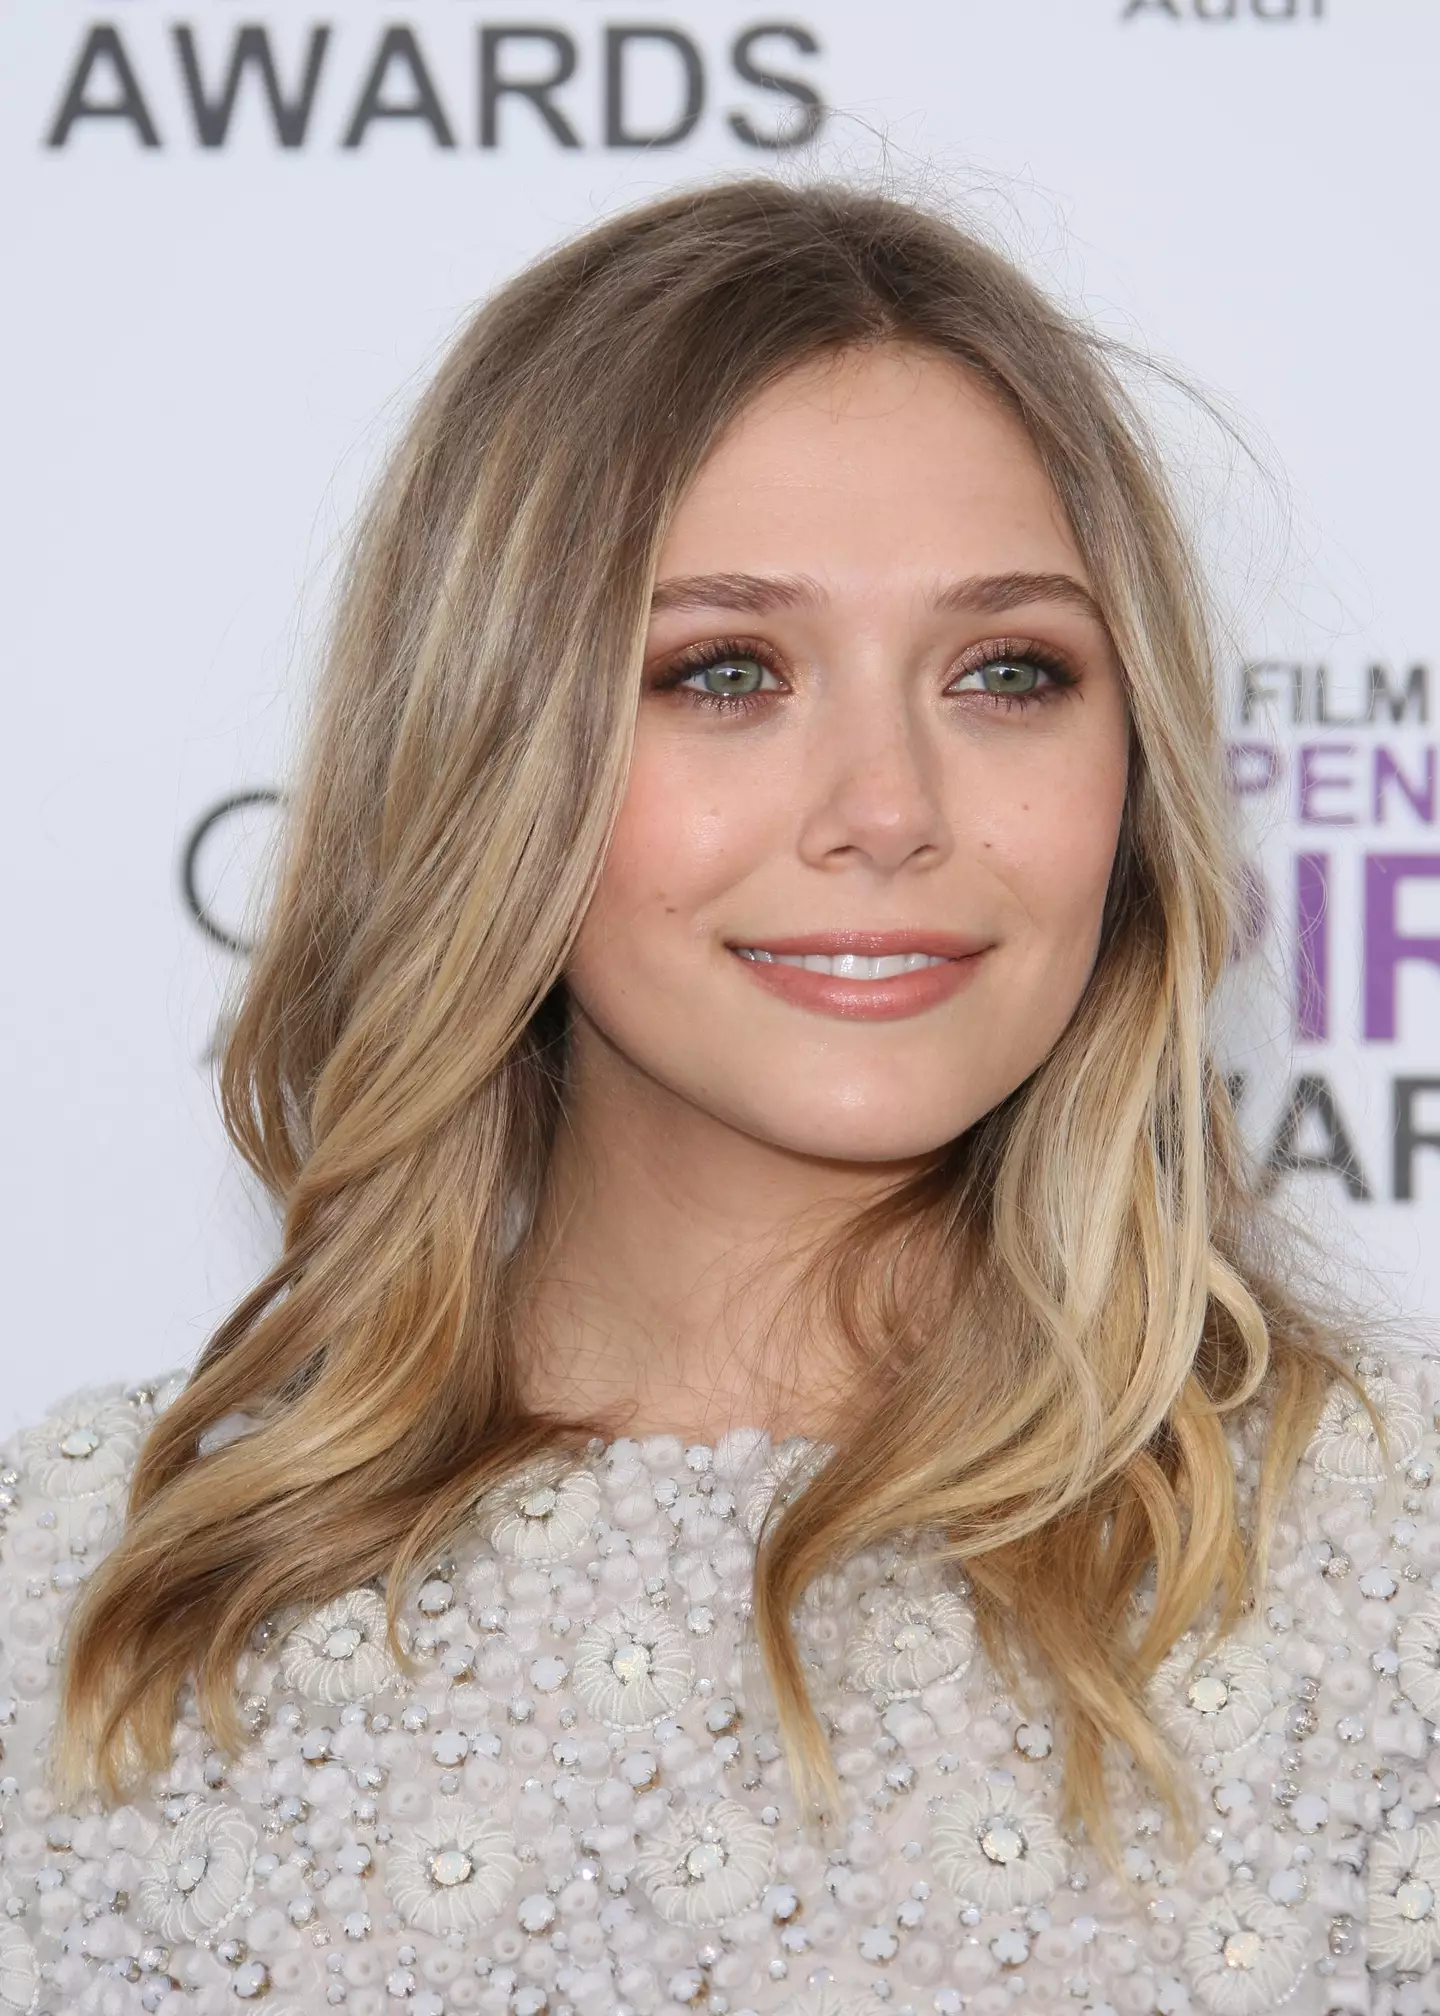 People think the robot bears an uncanny resemblance to Elizabeth Olsen.